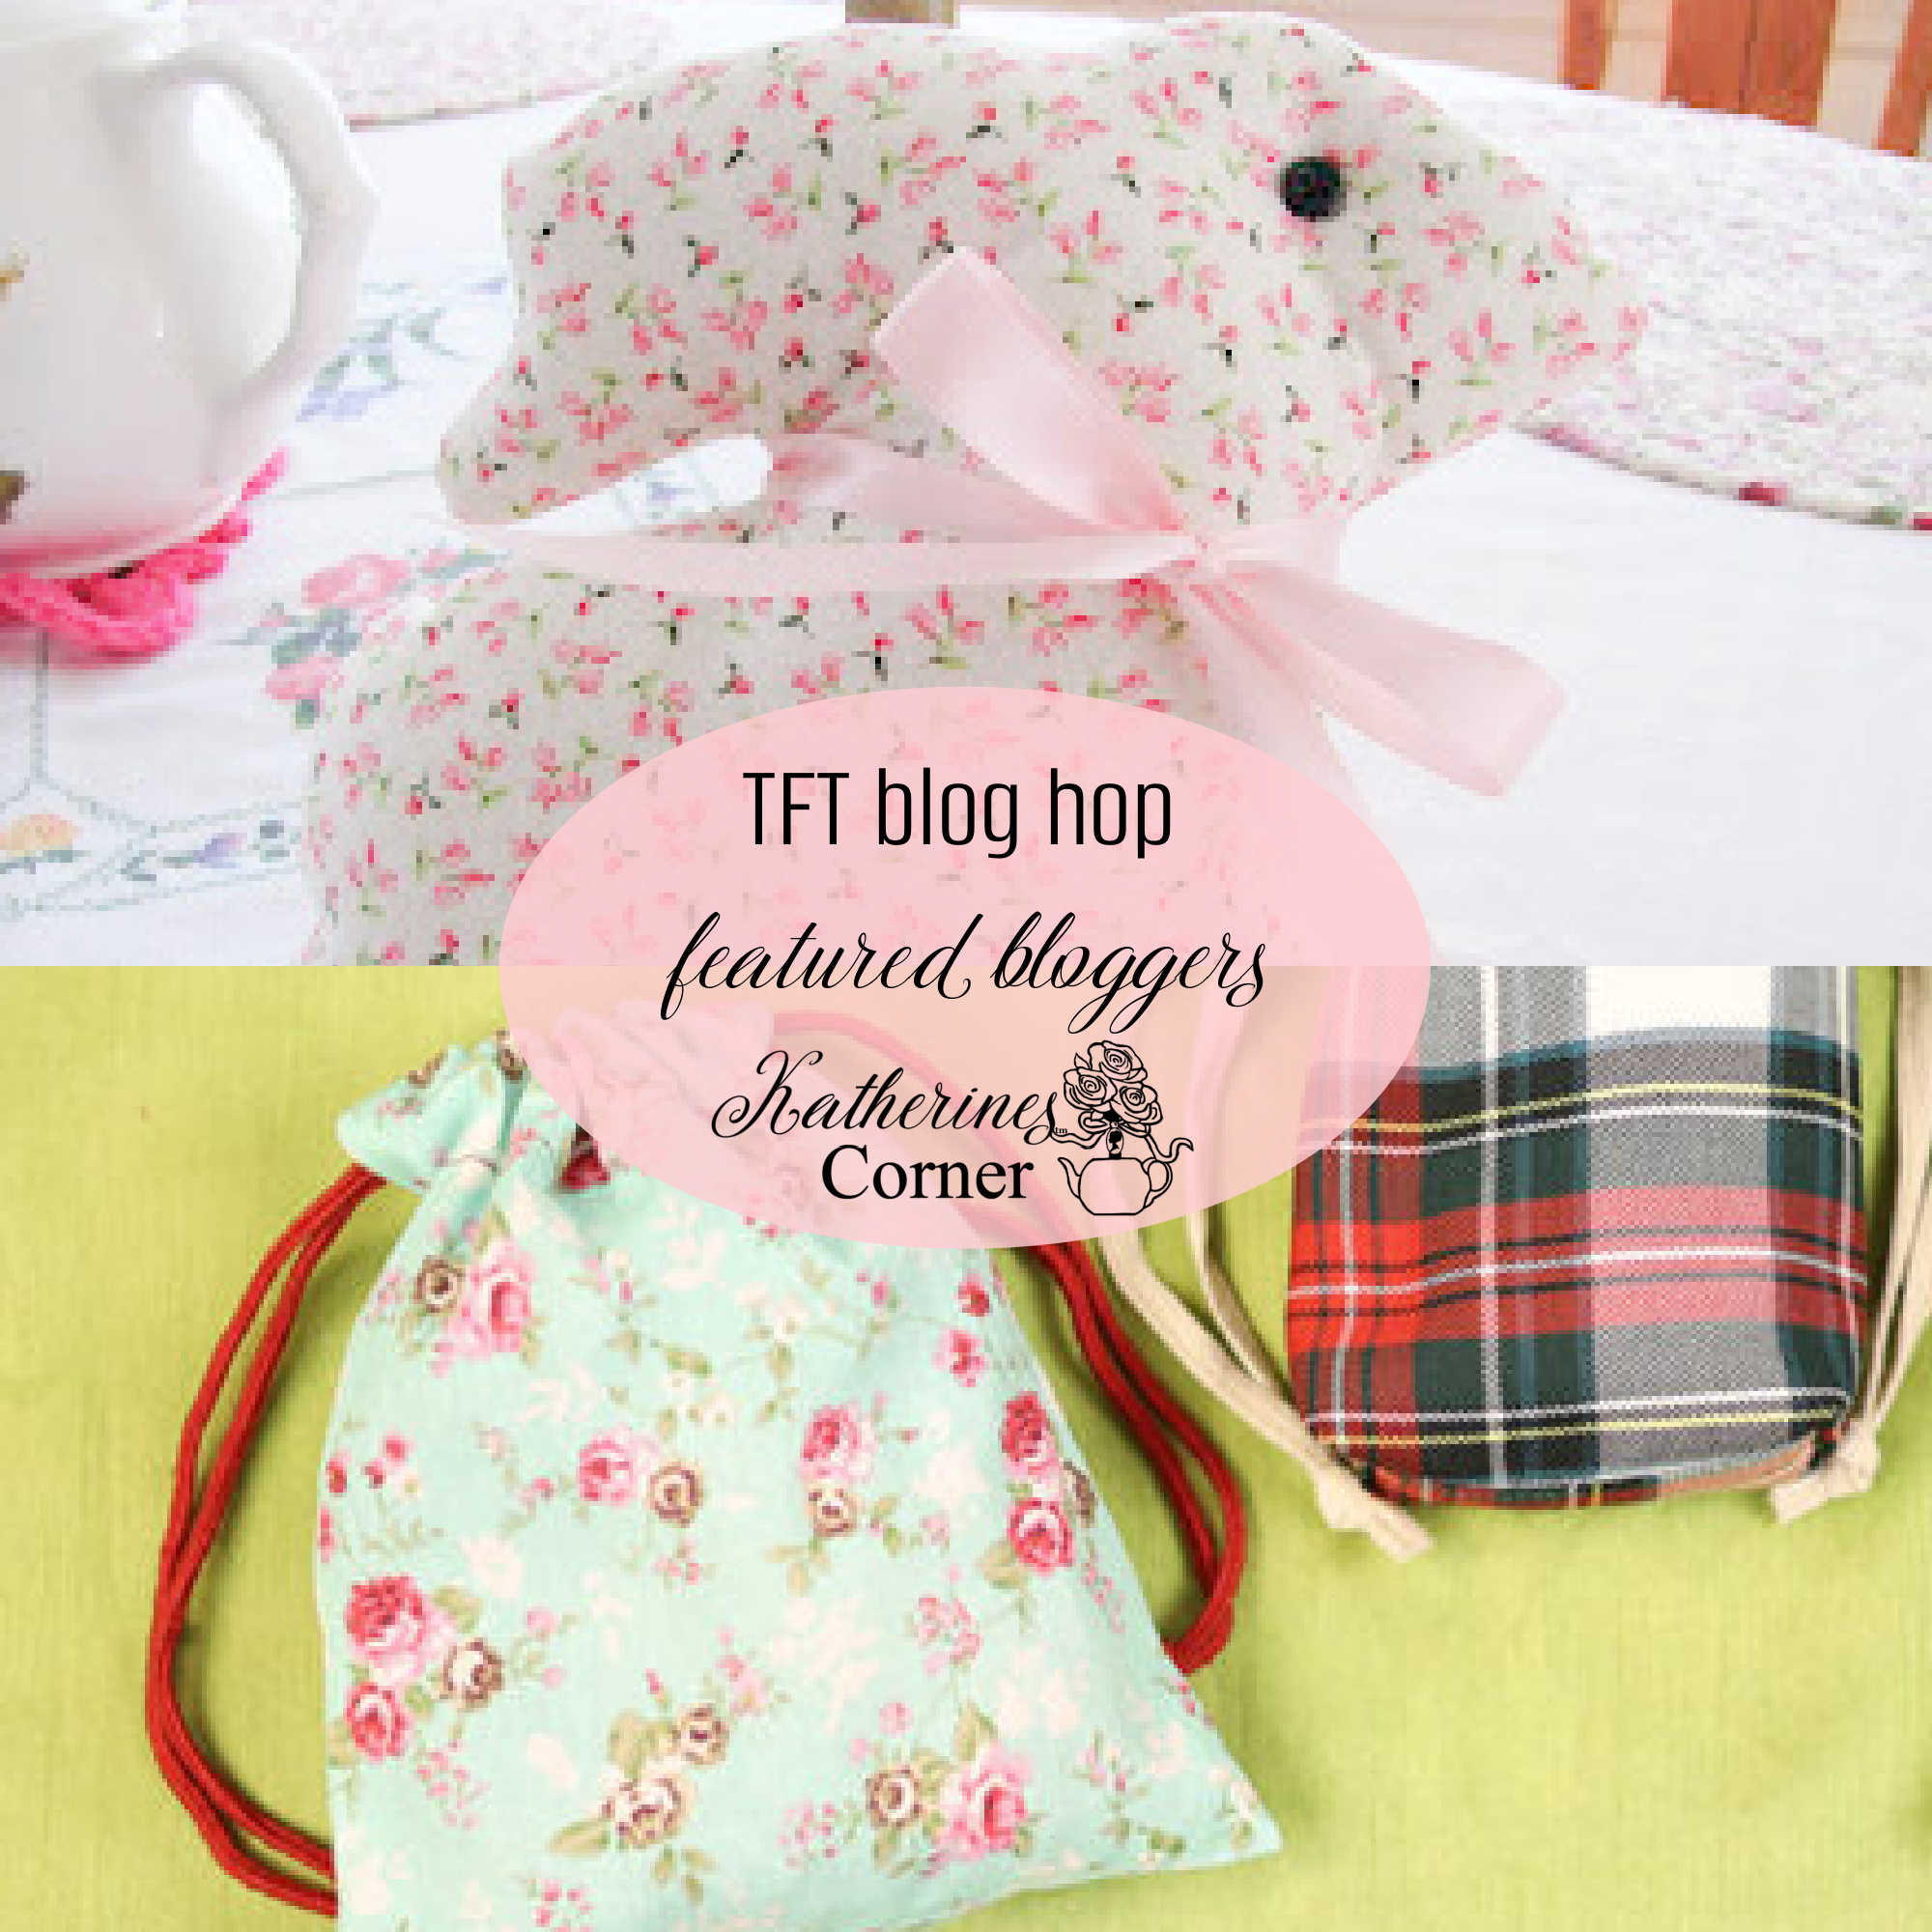 Needle and Thread and the TFT blog hop